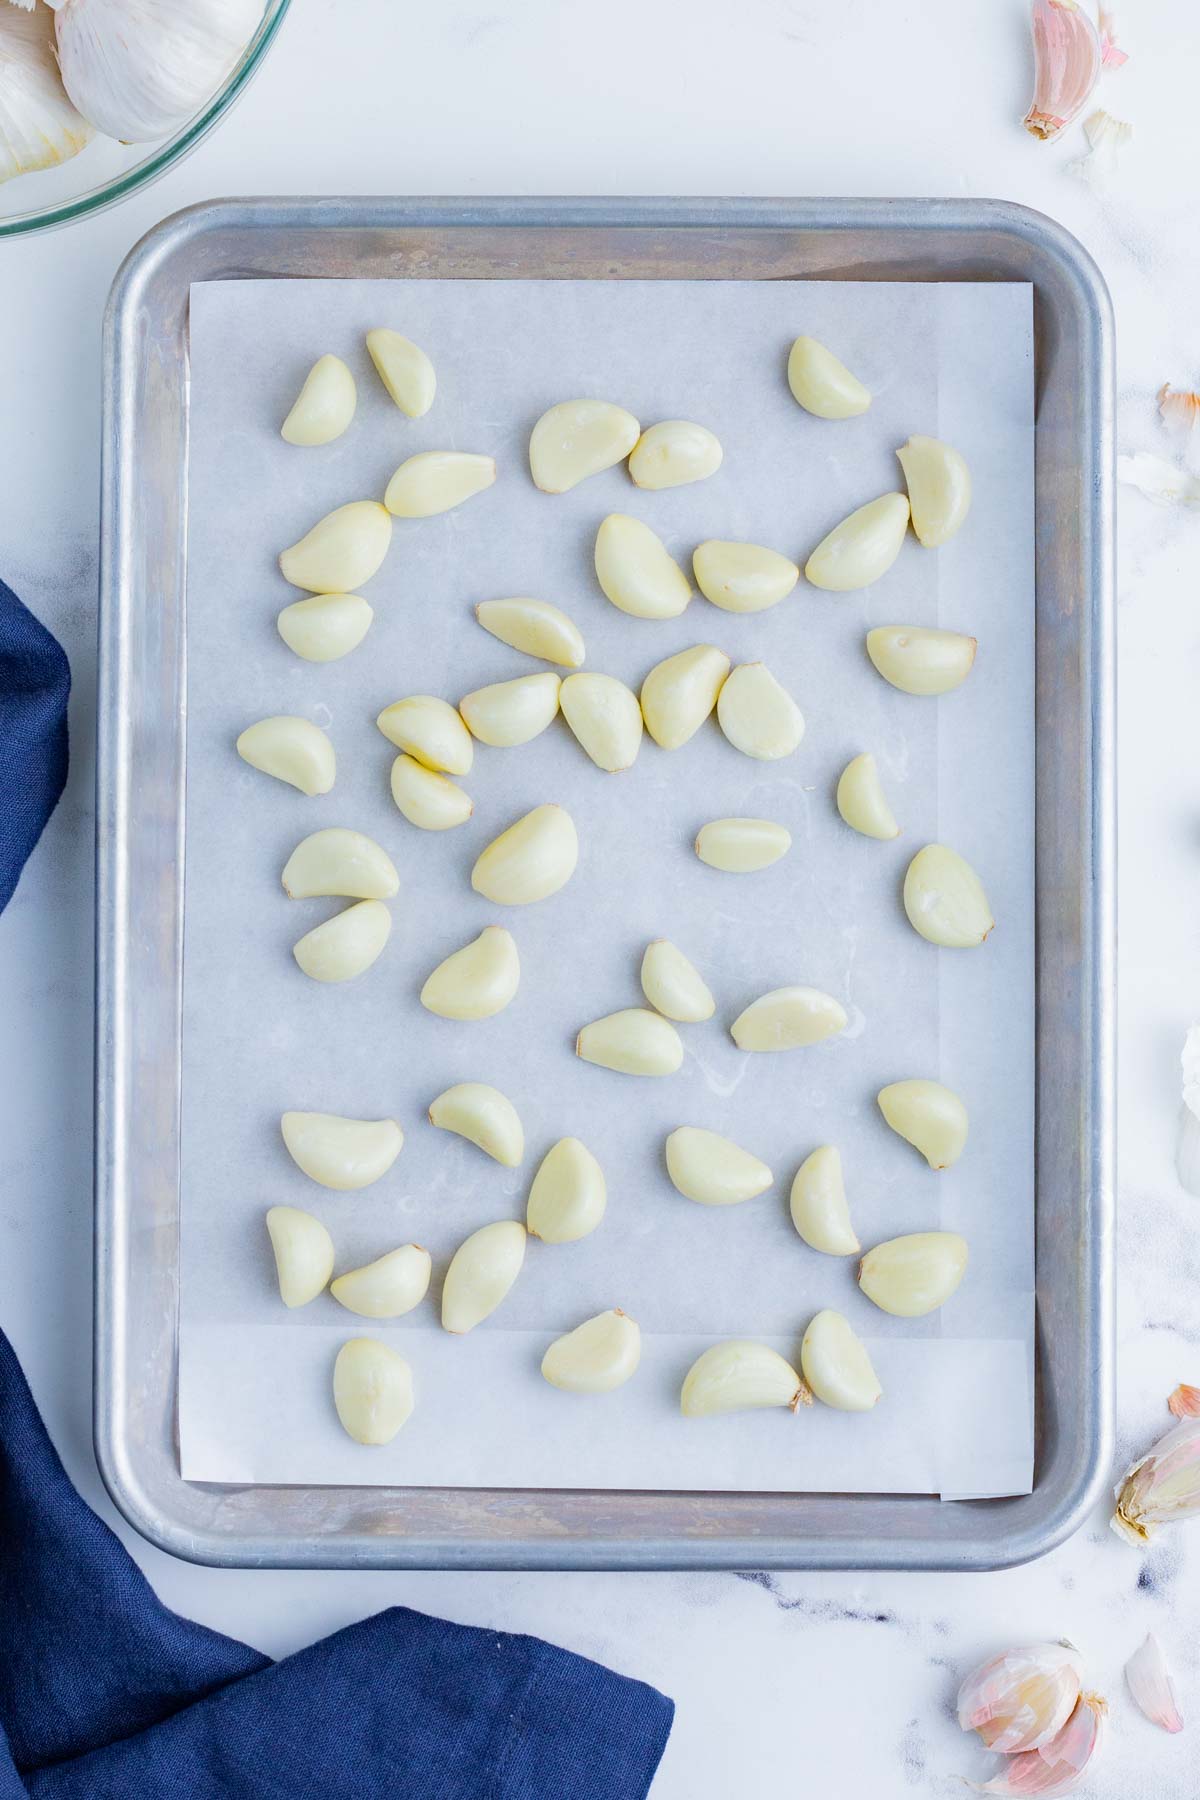 Peeled garlic cloves on a cookie sheet with parchment paper.